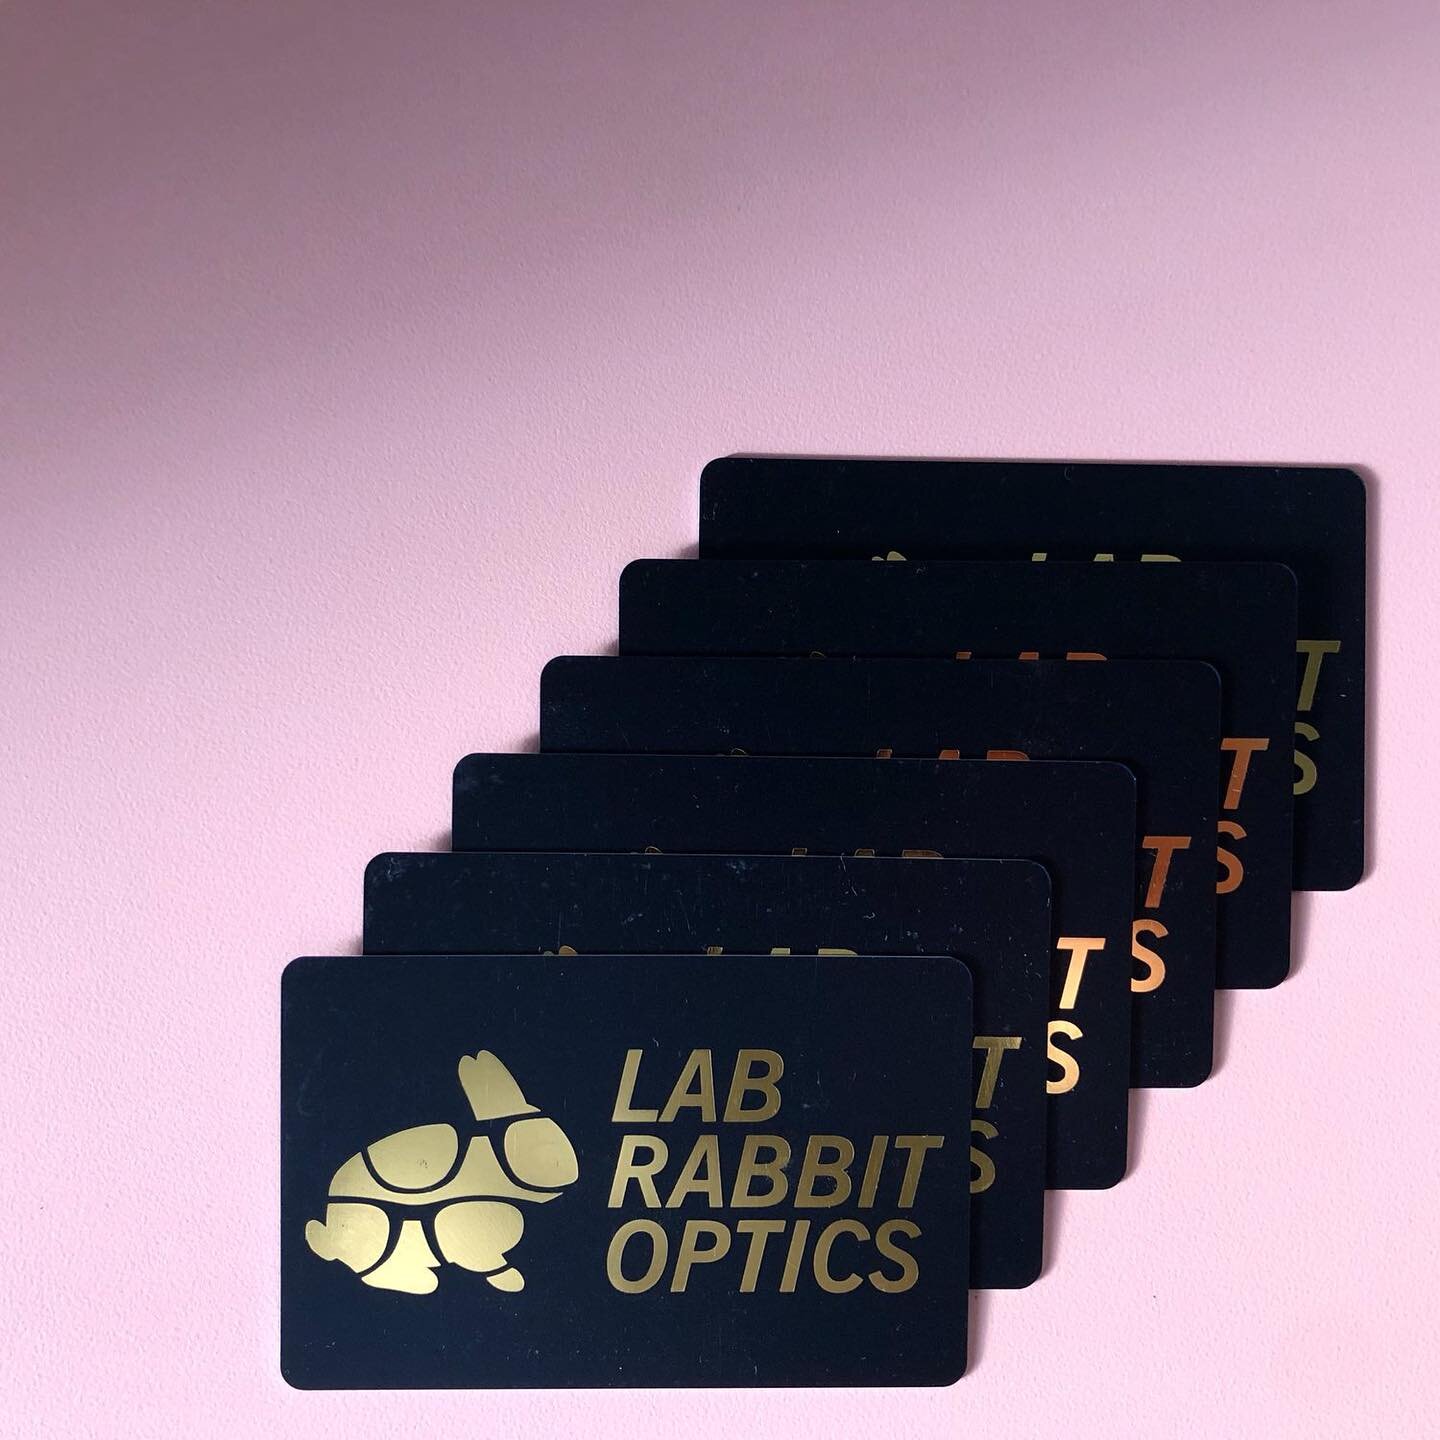 Lab Rabbit has gift cards!! Link in bio.  Give the gift of SIGHT ✨👓✨